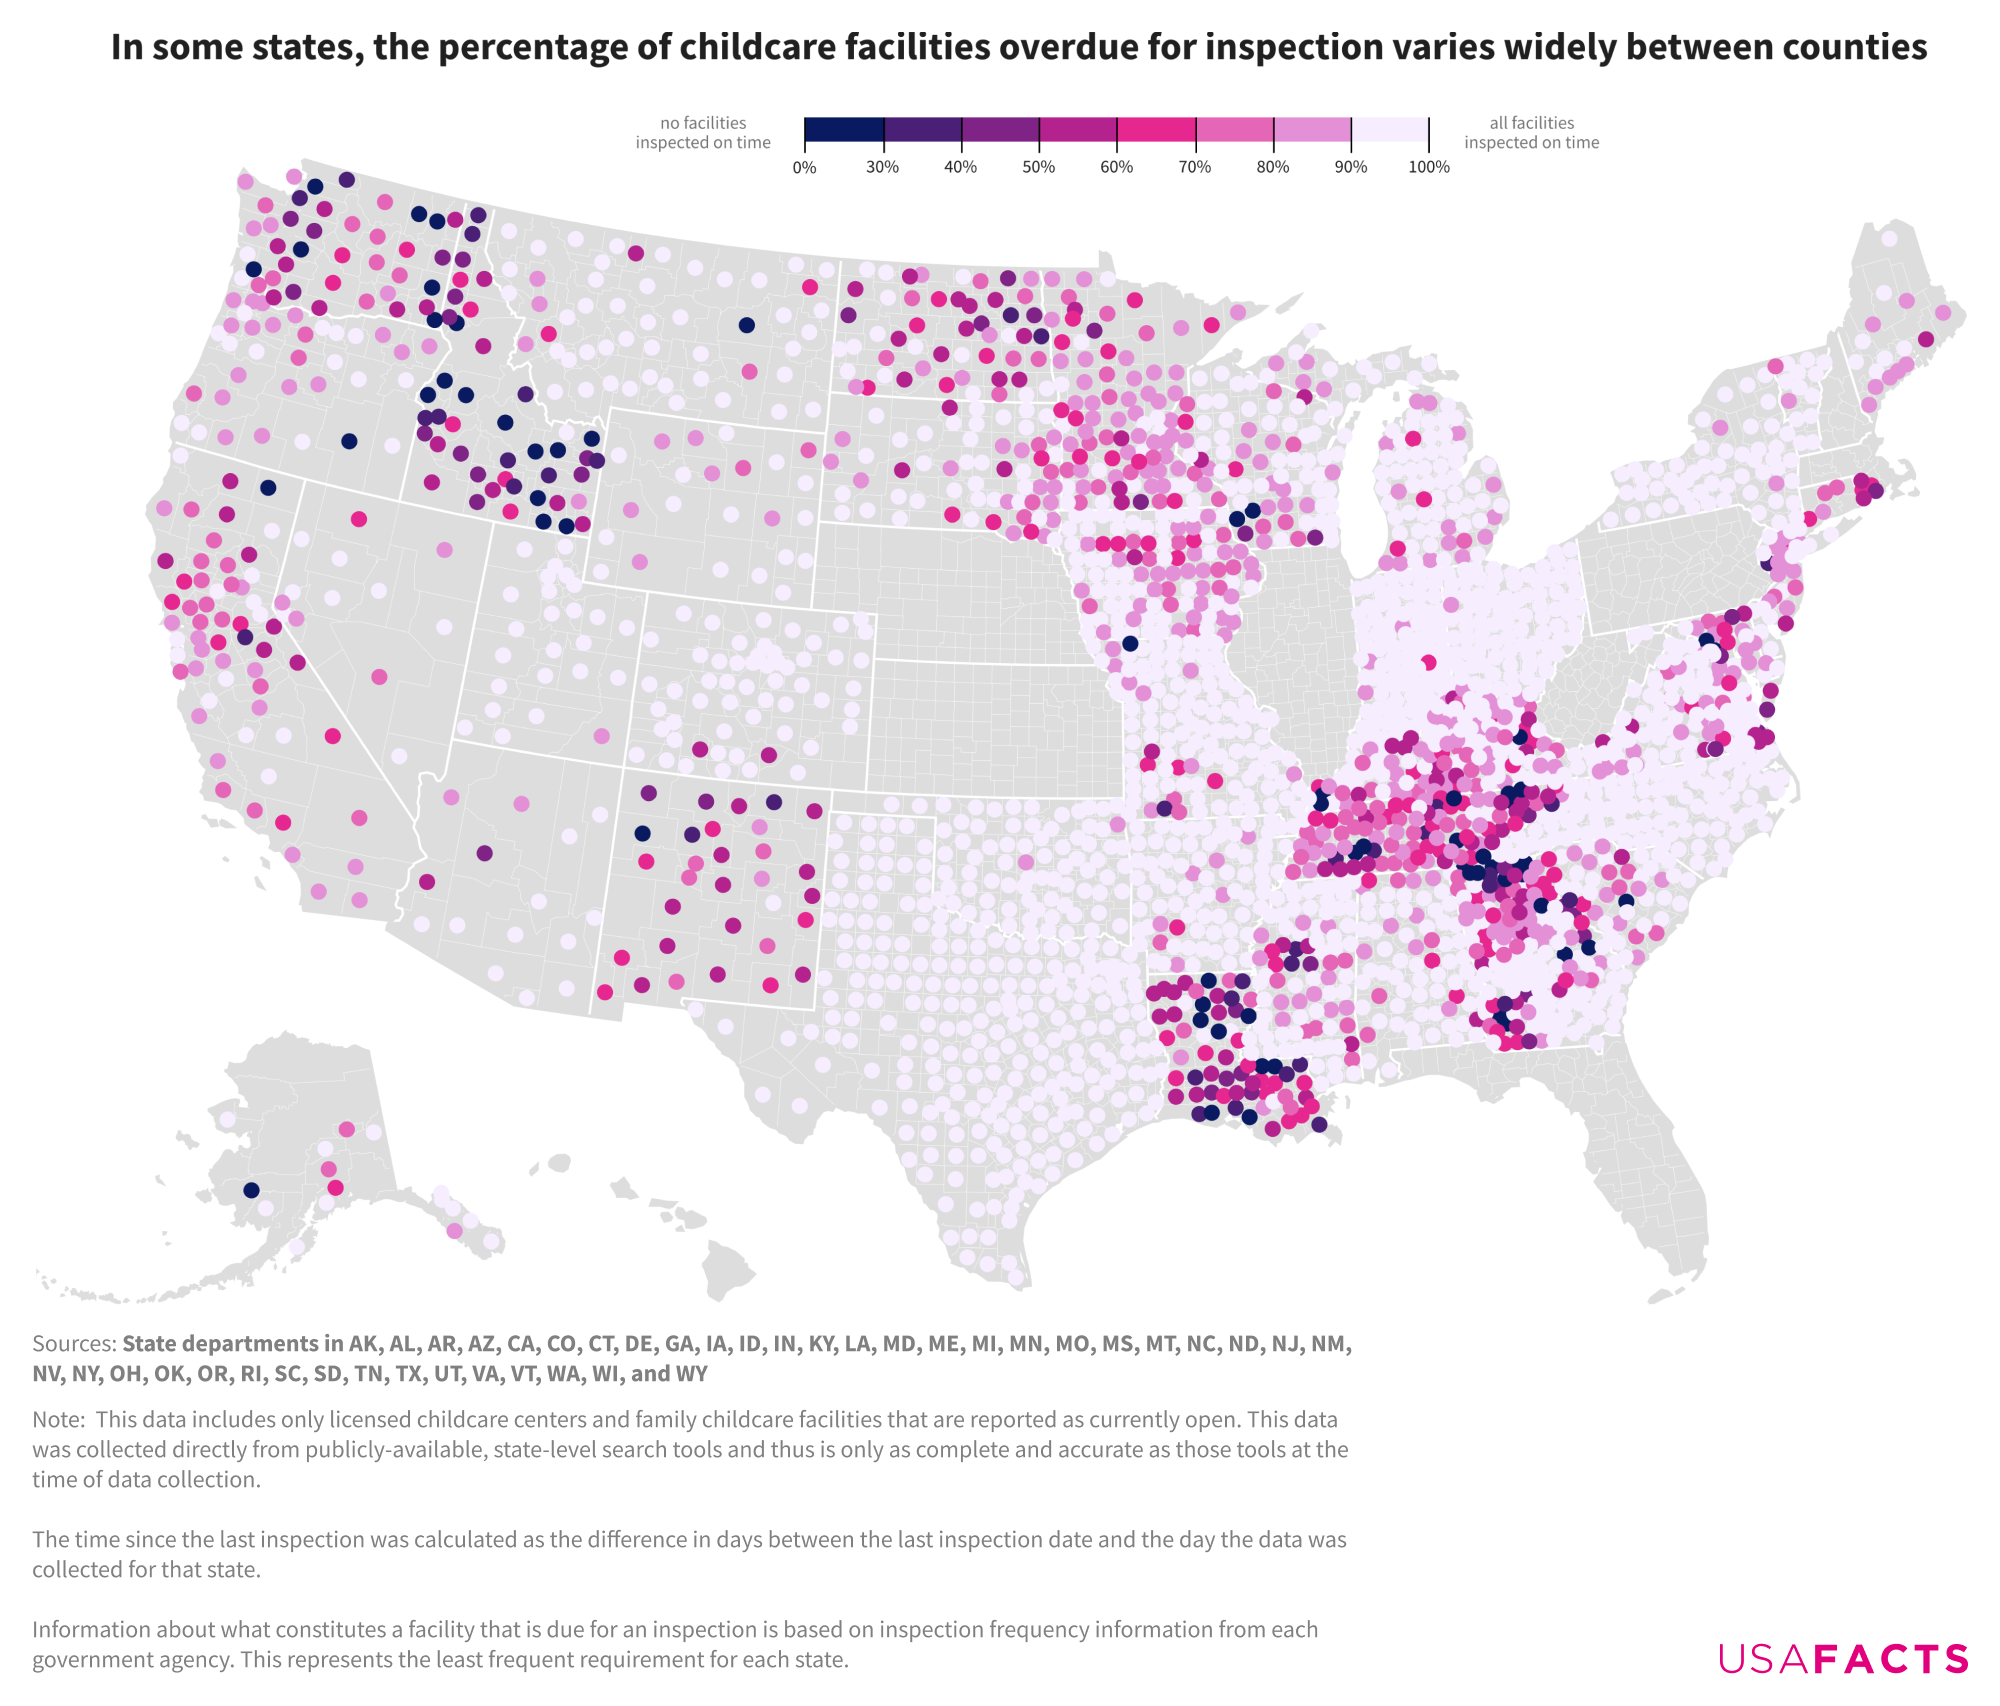 US county map showing the percentage of childcare facilities within each county that have been inspected within the regulated time frame.